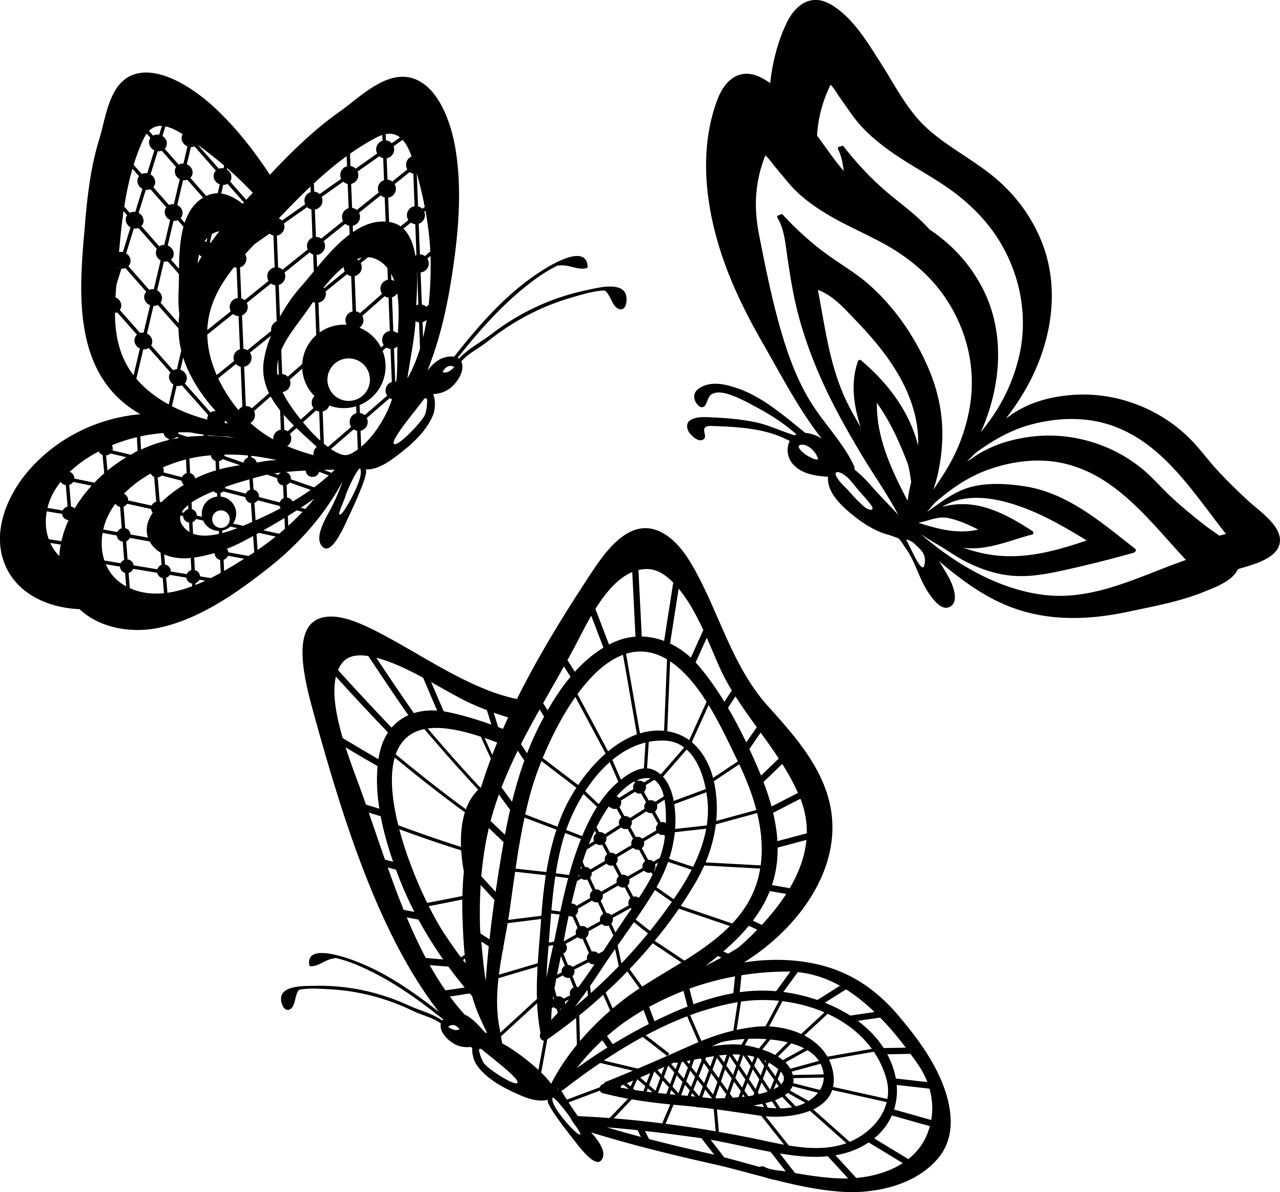 60 Winsome and Delightful Butterfly Tattoos Ideas And Designs For Waist   Psycho Tats